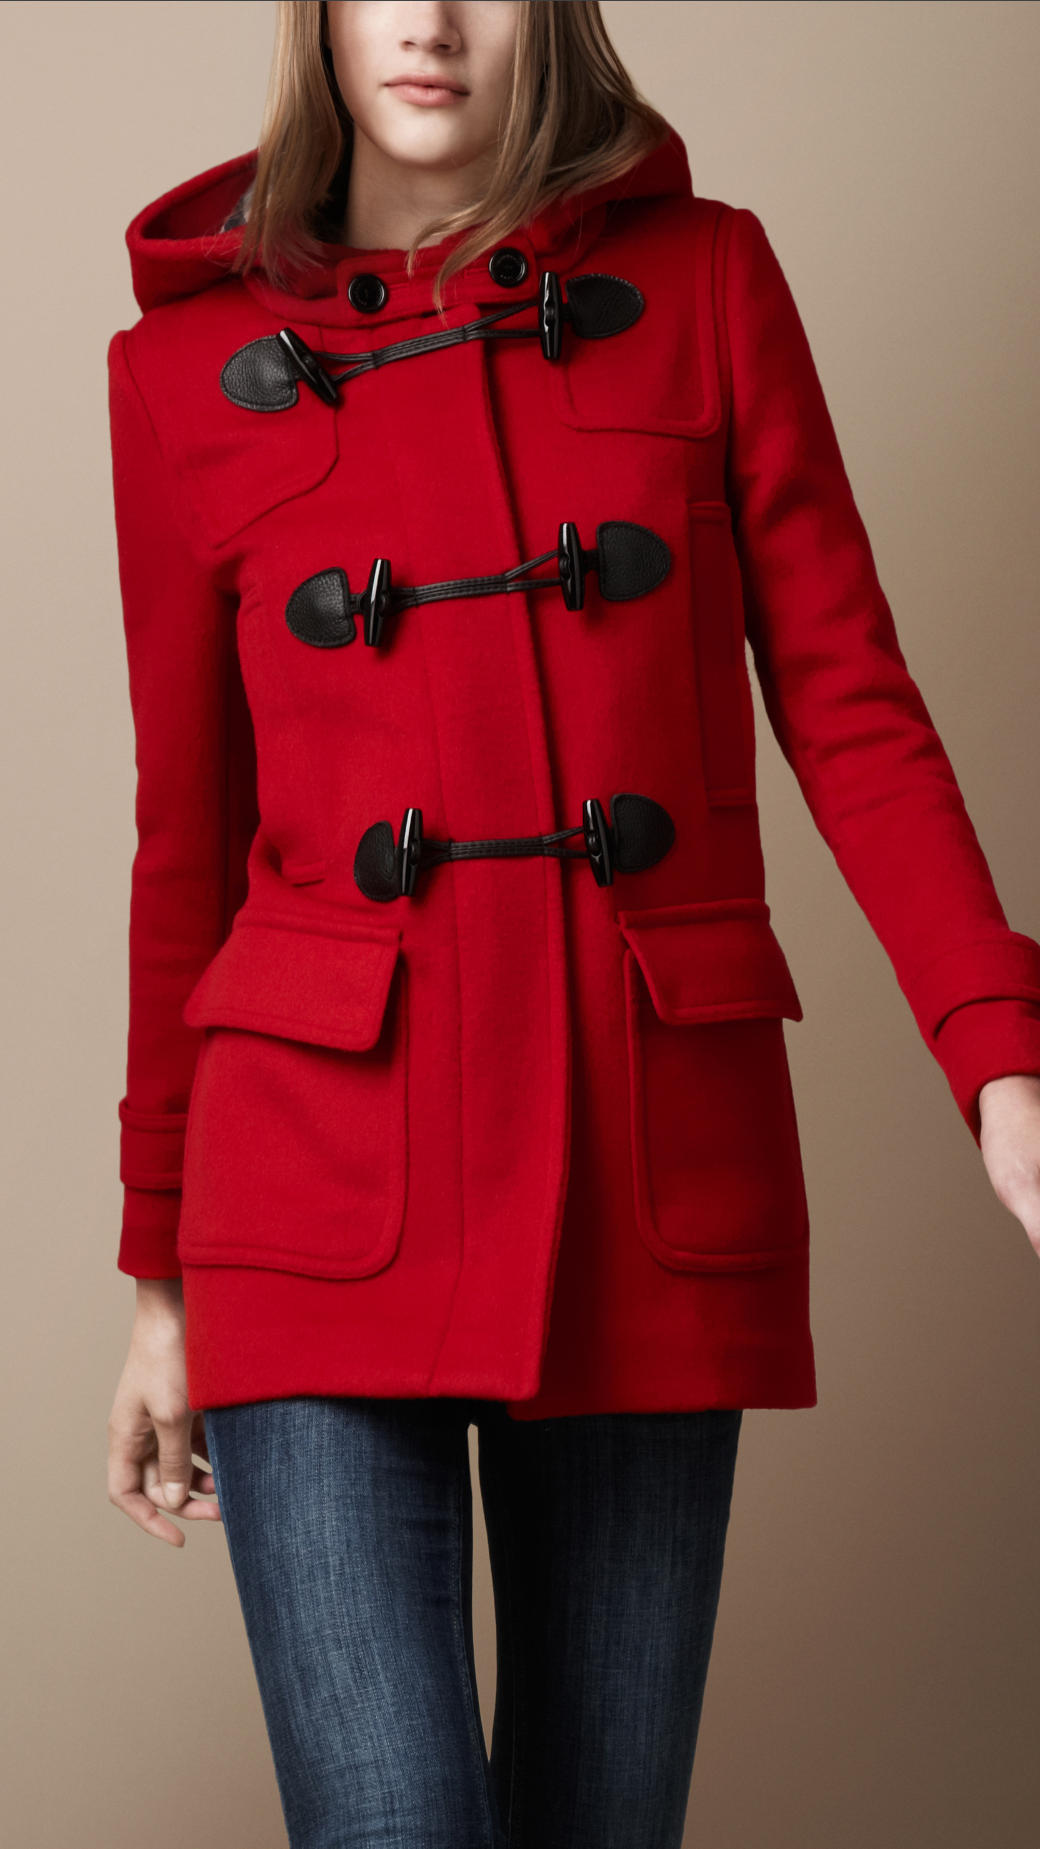 Lyst - Burberry Brit Wool Duffle Coat in Red